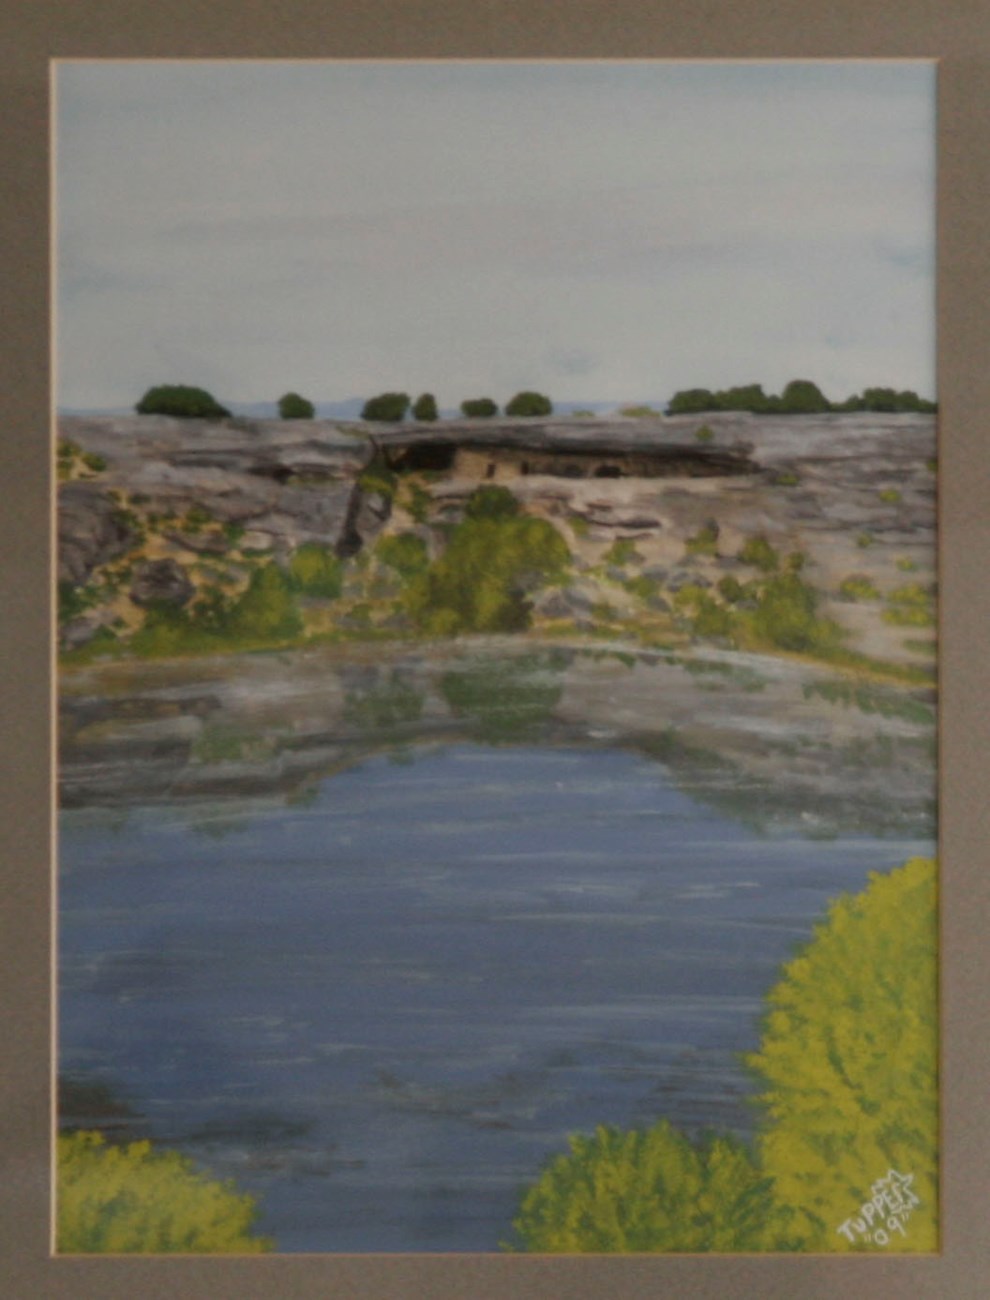 Montezuma Well by the hand of Tupper